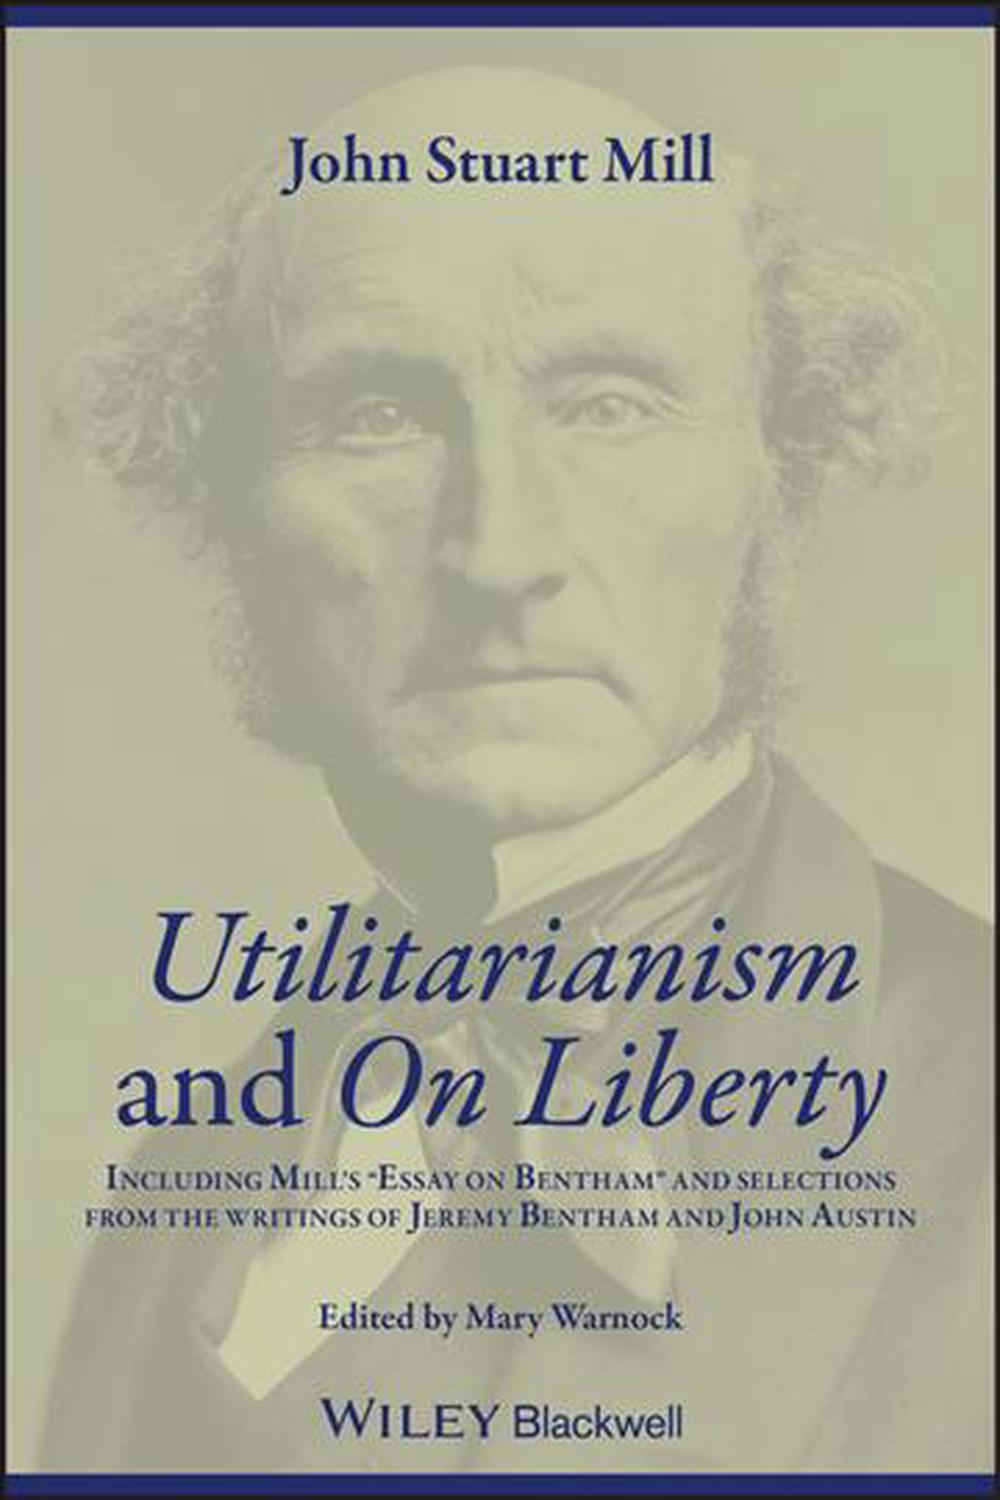 on liberty and utilitarianism